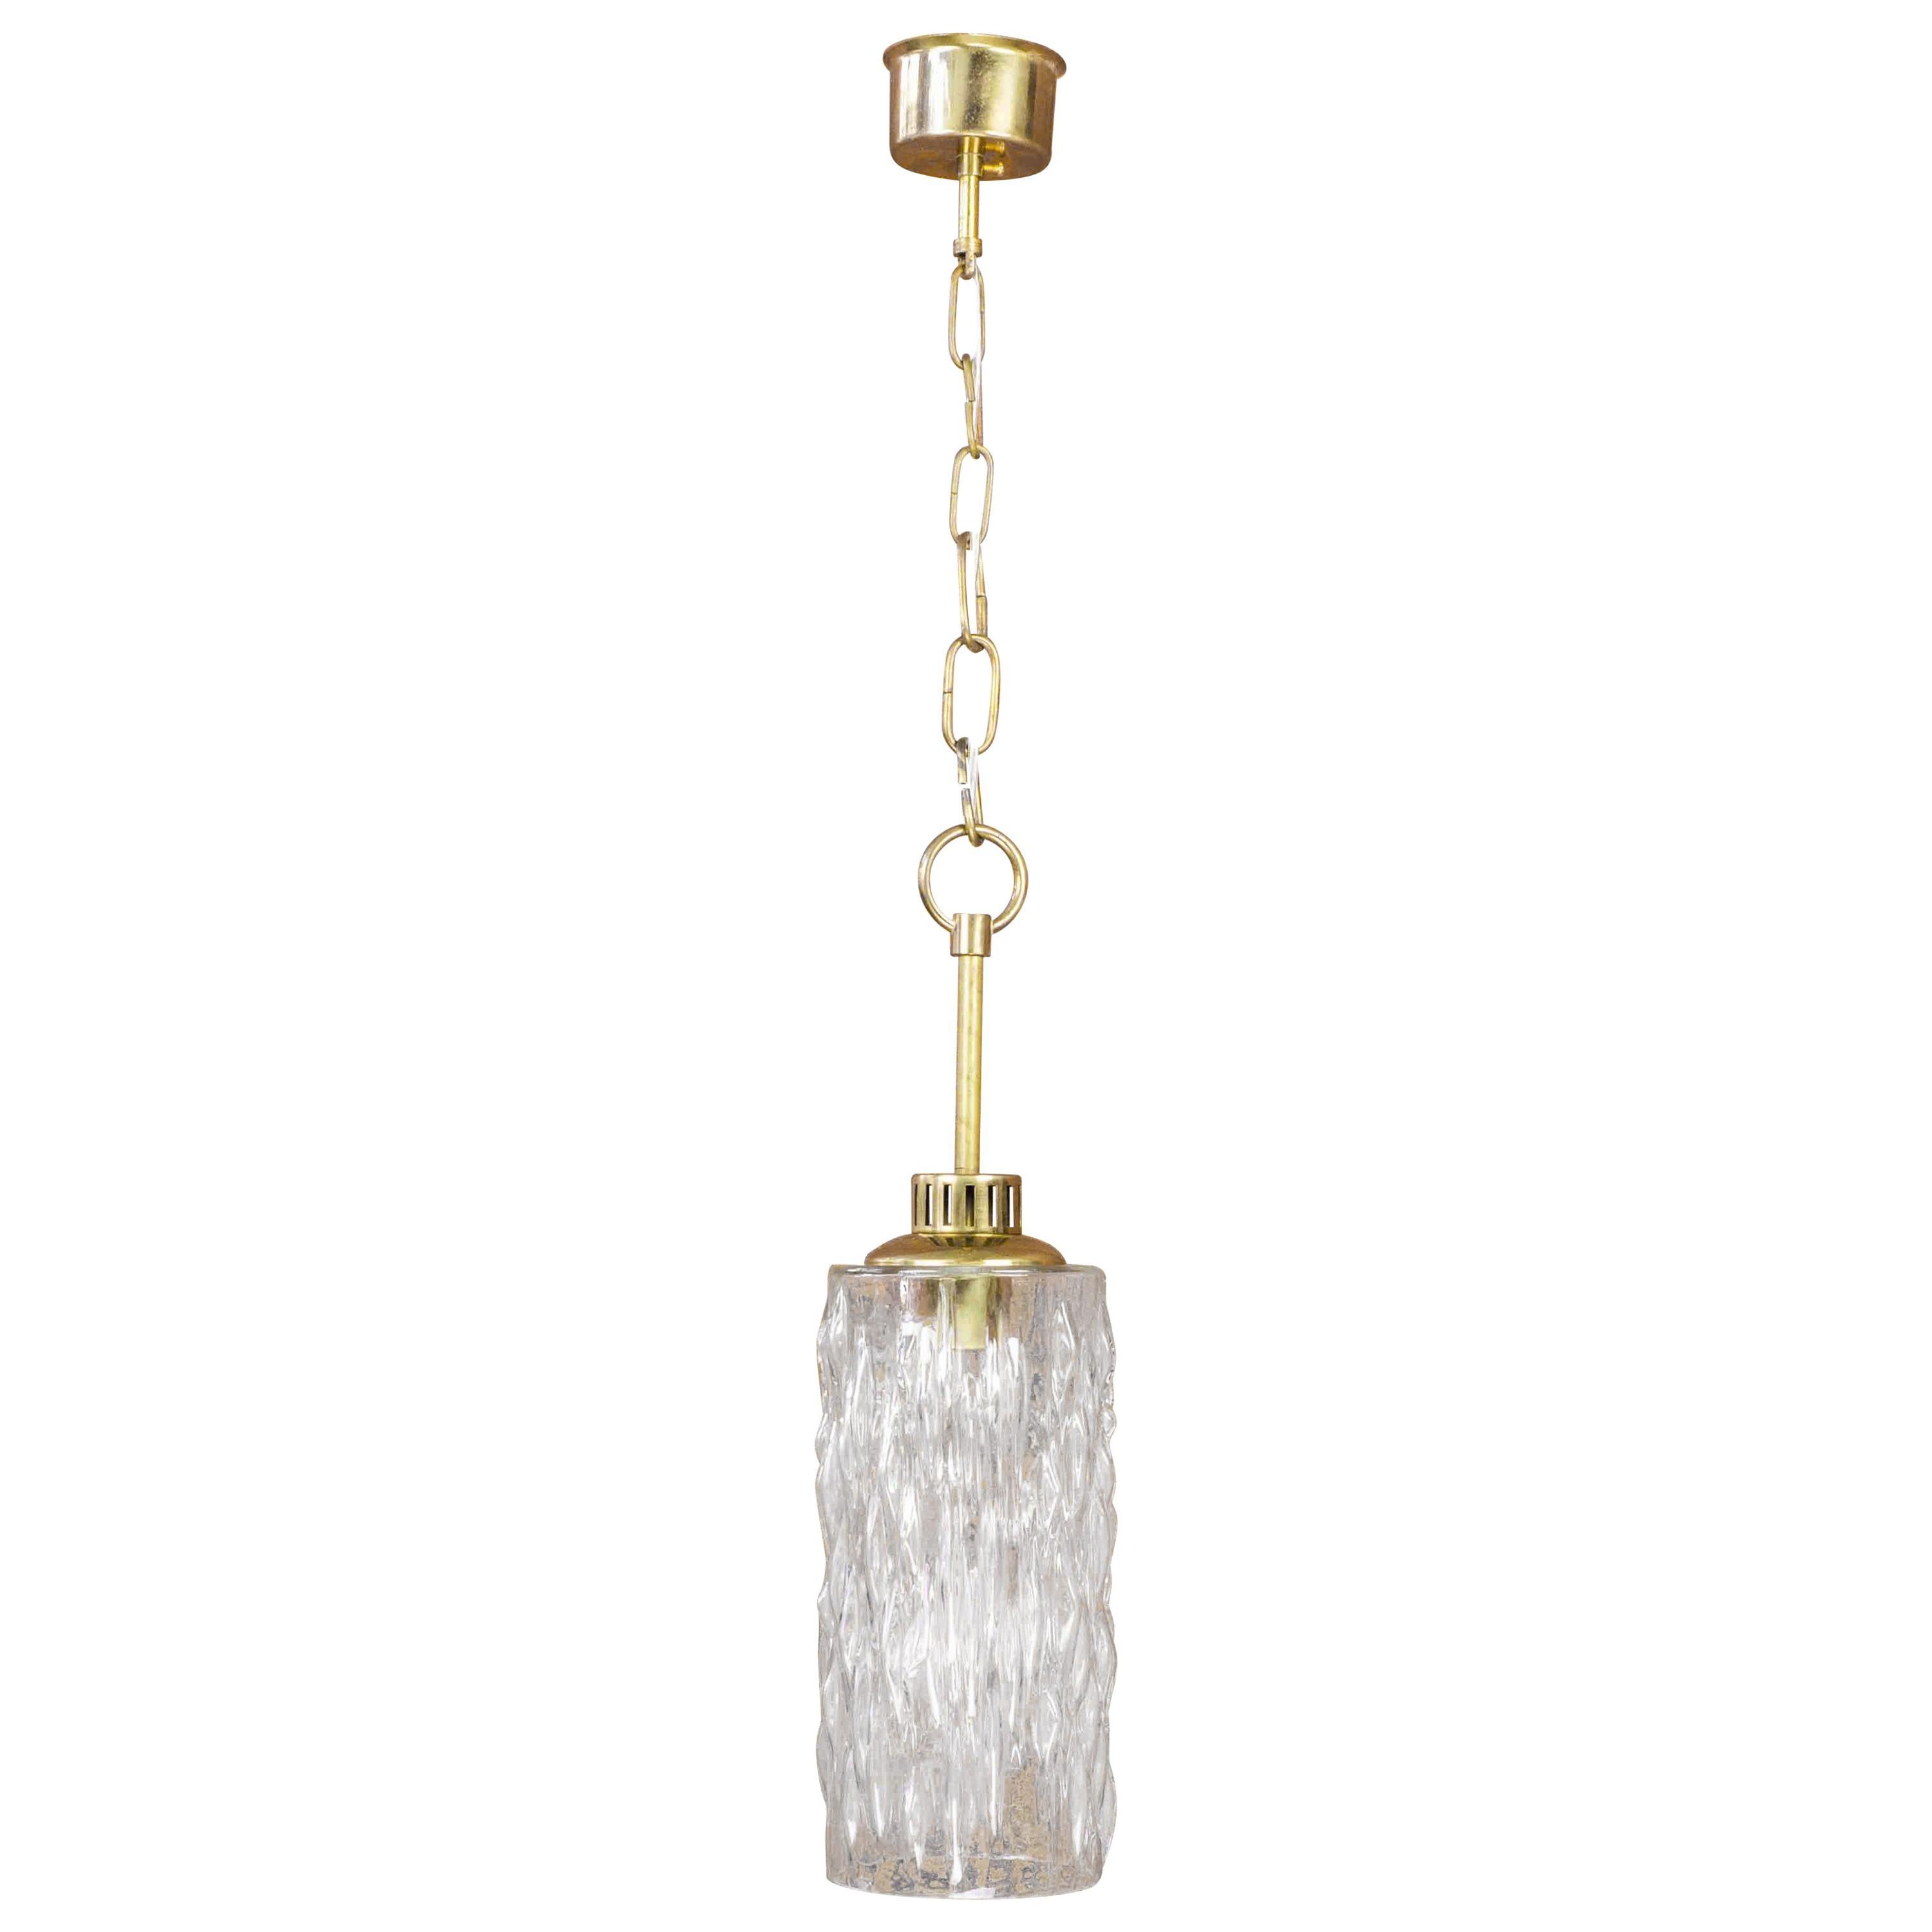 French 1960s Glass and Brass Hanging Pendant